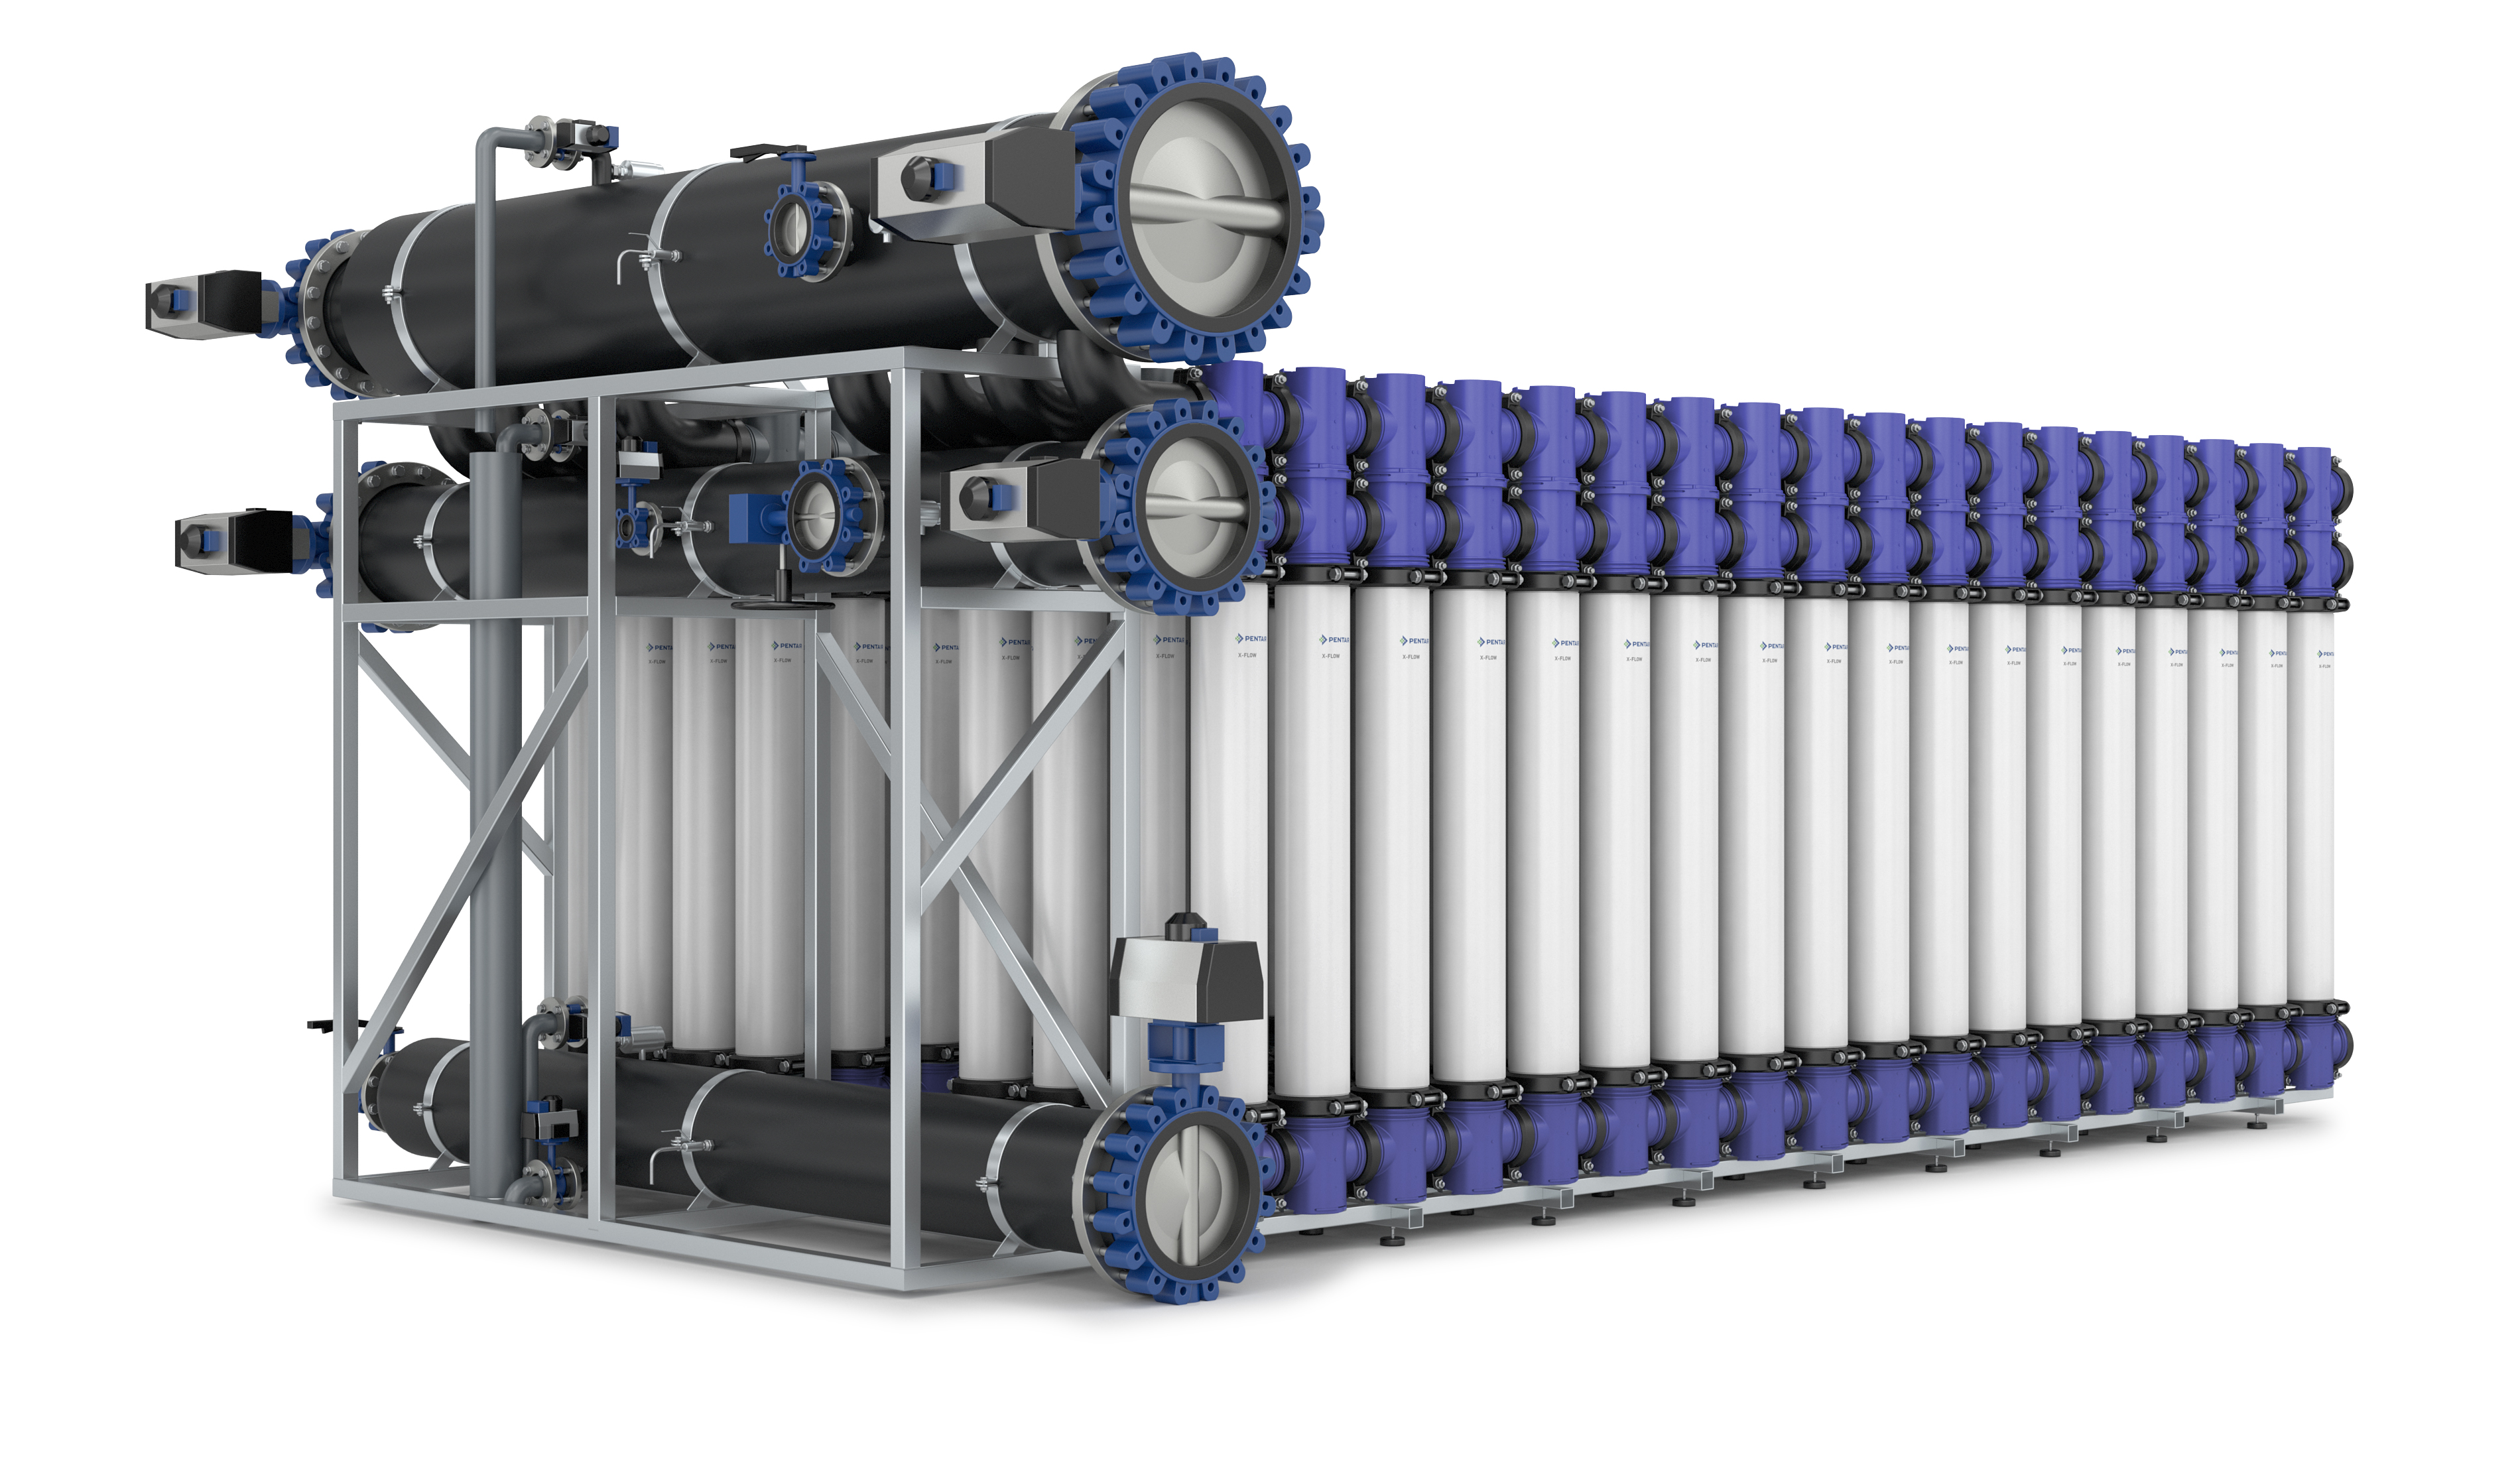 The Pentair X-Flow XF75 Membrane Element in the Pentair X-Flow X-line solution.